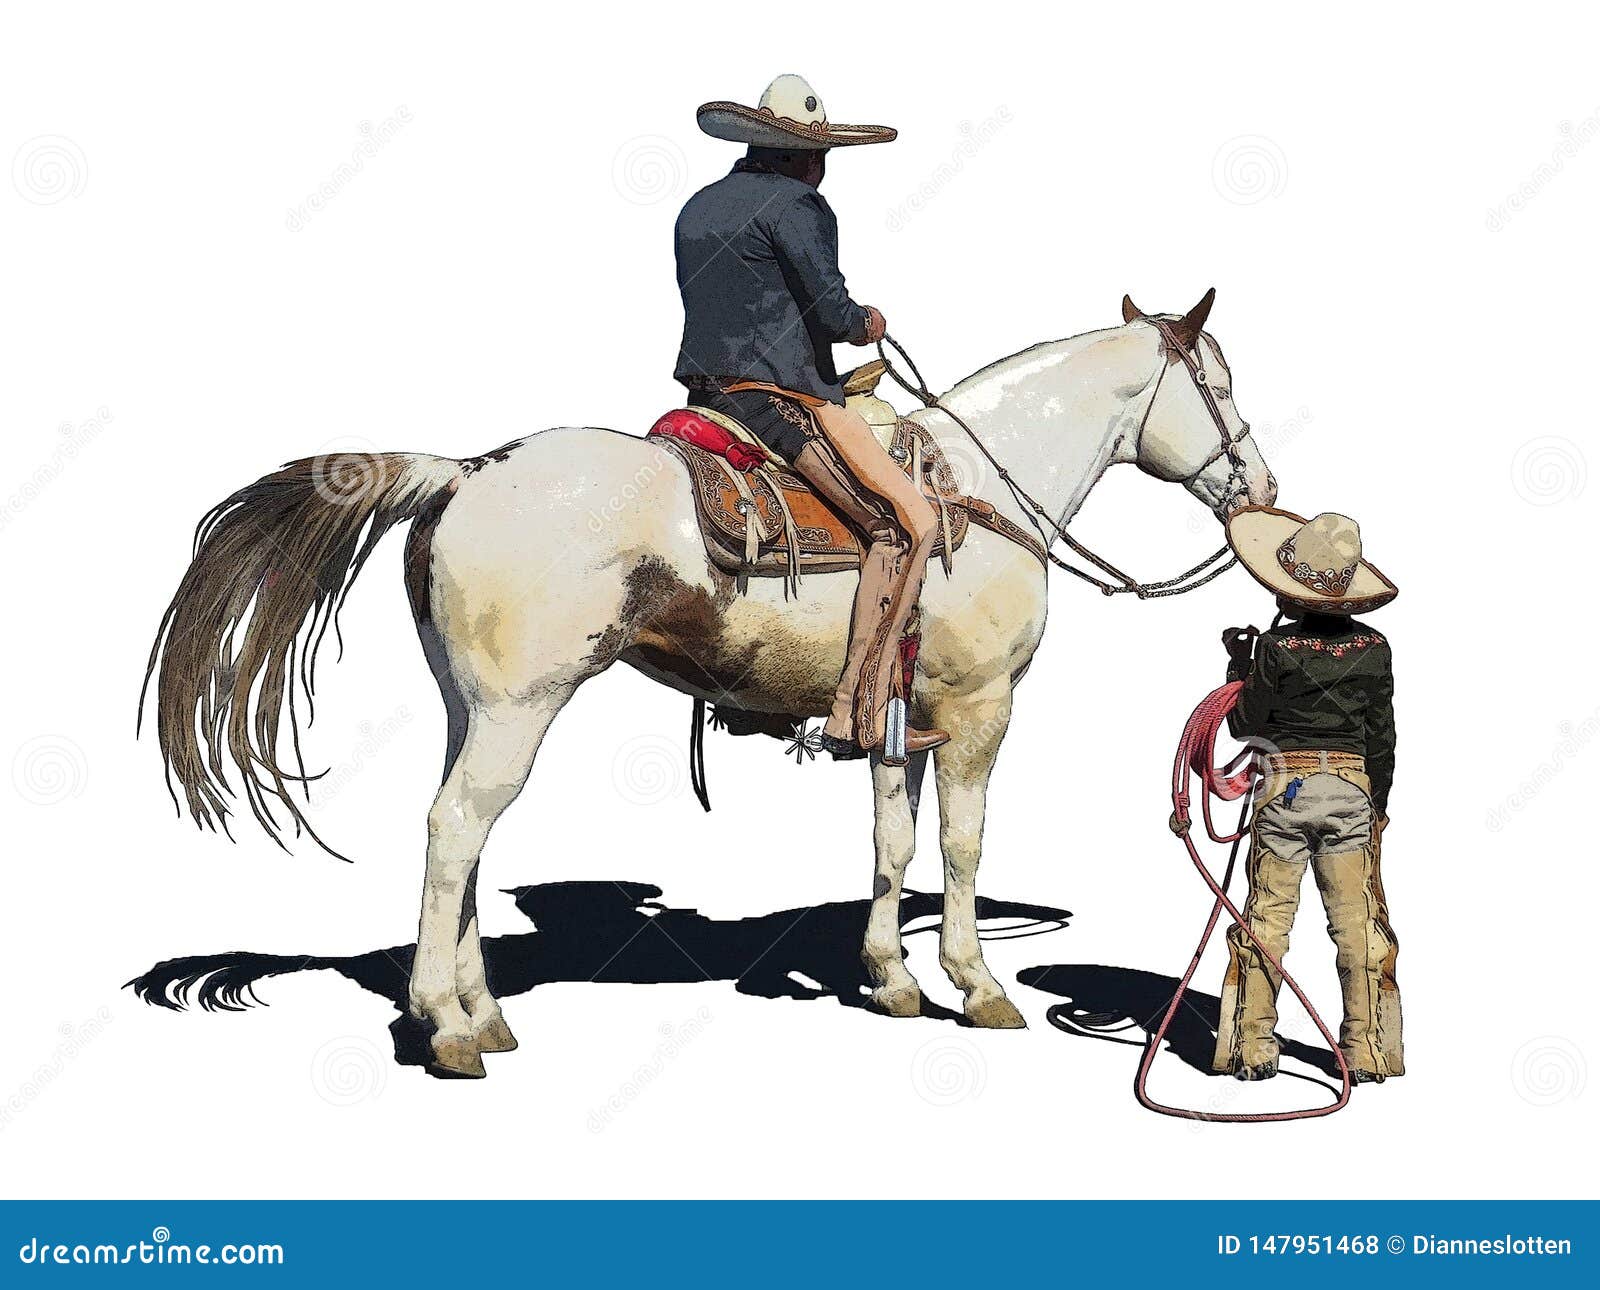 iconic clipart of a little caballero and his dad